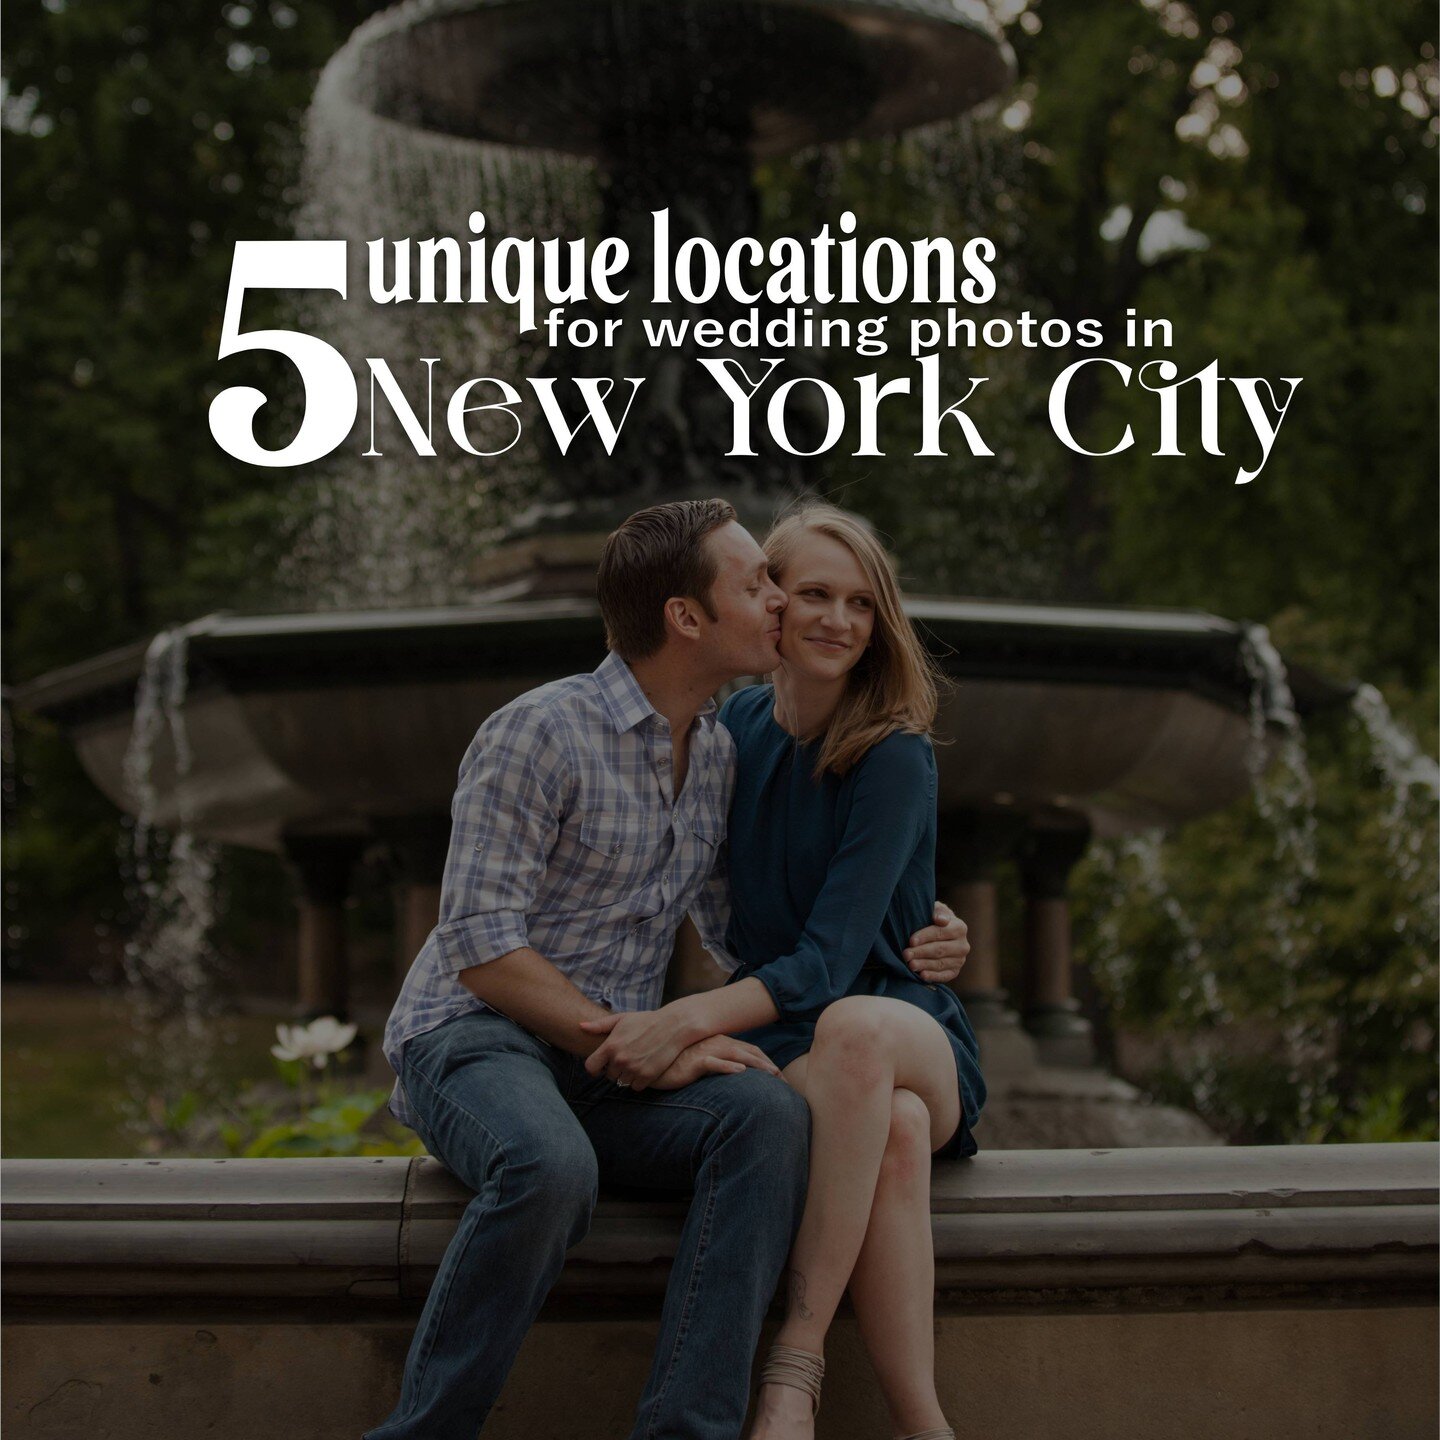 Are you looking for unique places to take wedding photos in New York City? 🌏 We have the best options for you! Here are 5 stunning places in NYC that are perfect for capturing unforgettable moments on your big day:

✅Central Park: What better place 